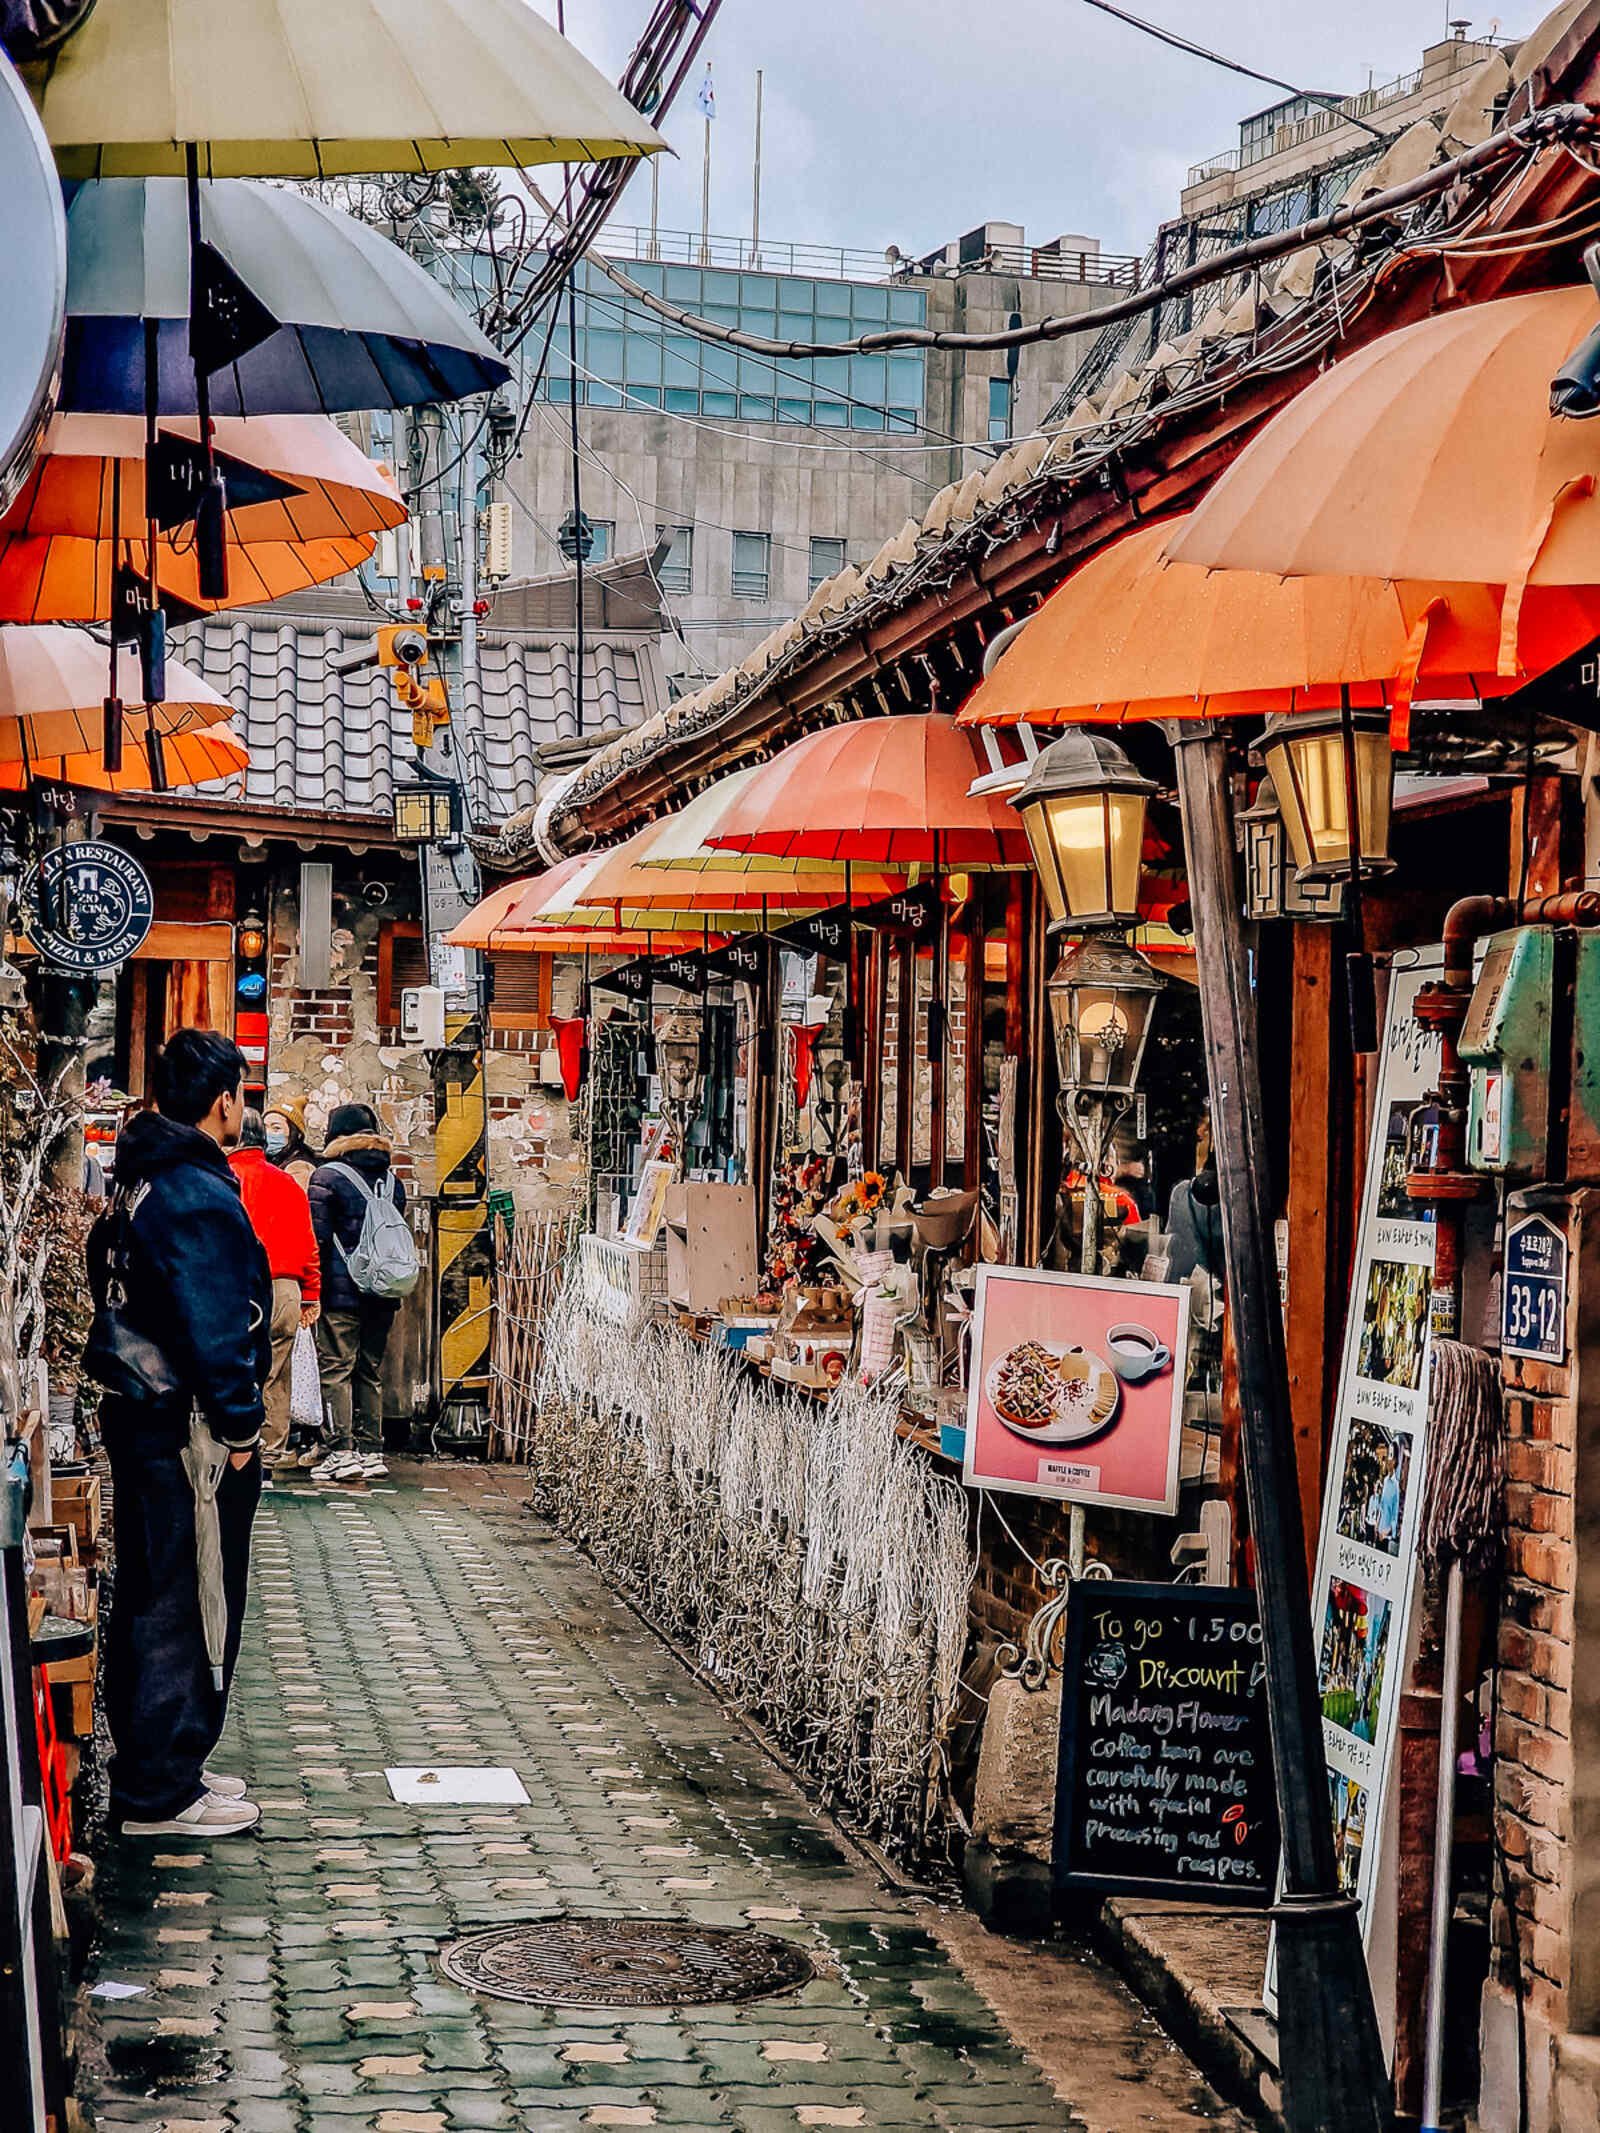 a narrow street lined with cafes with decorative orange umbrellas